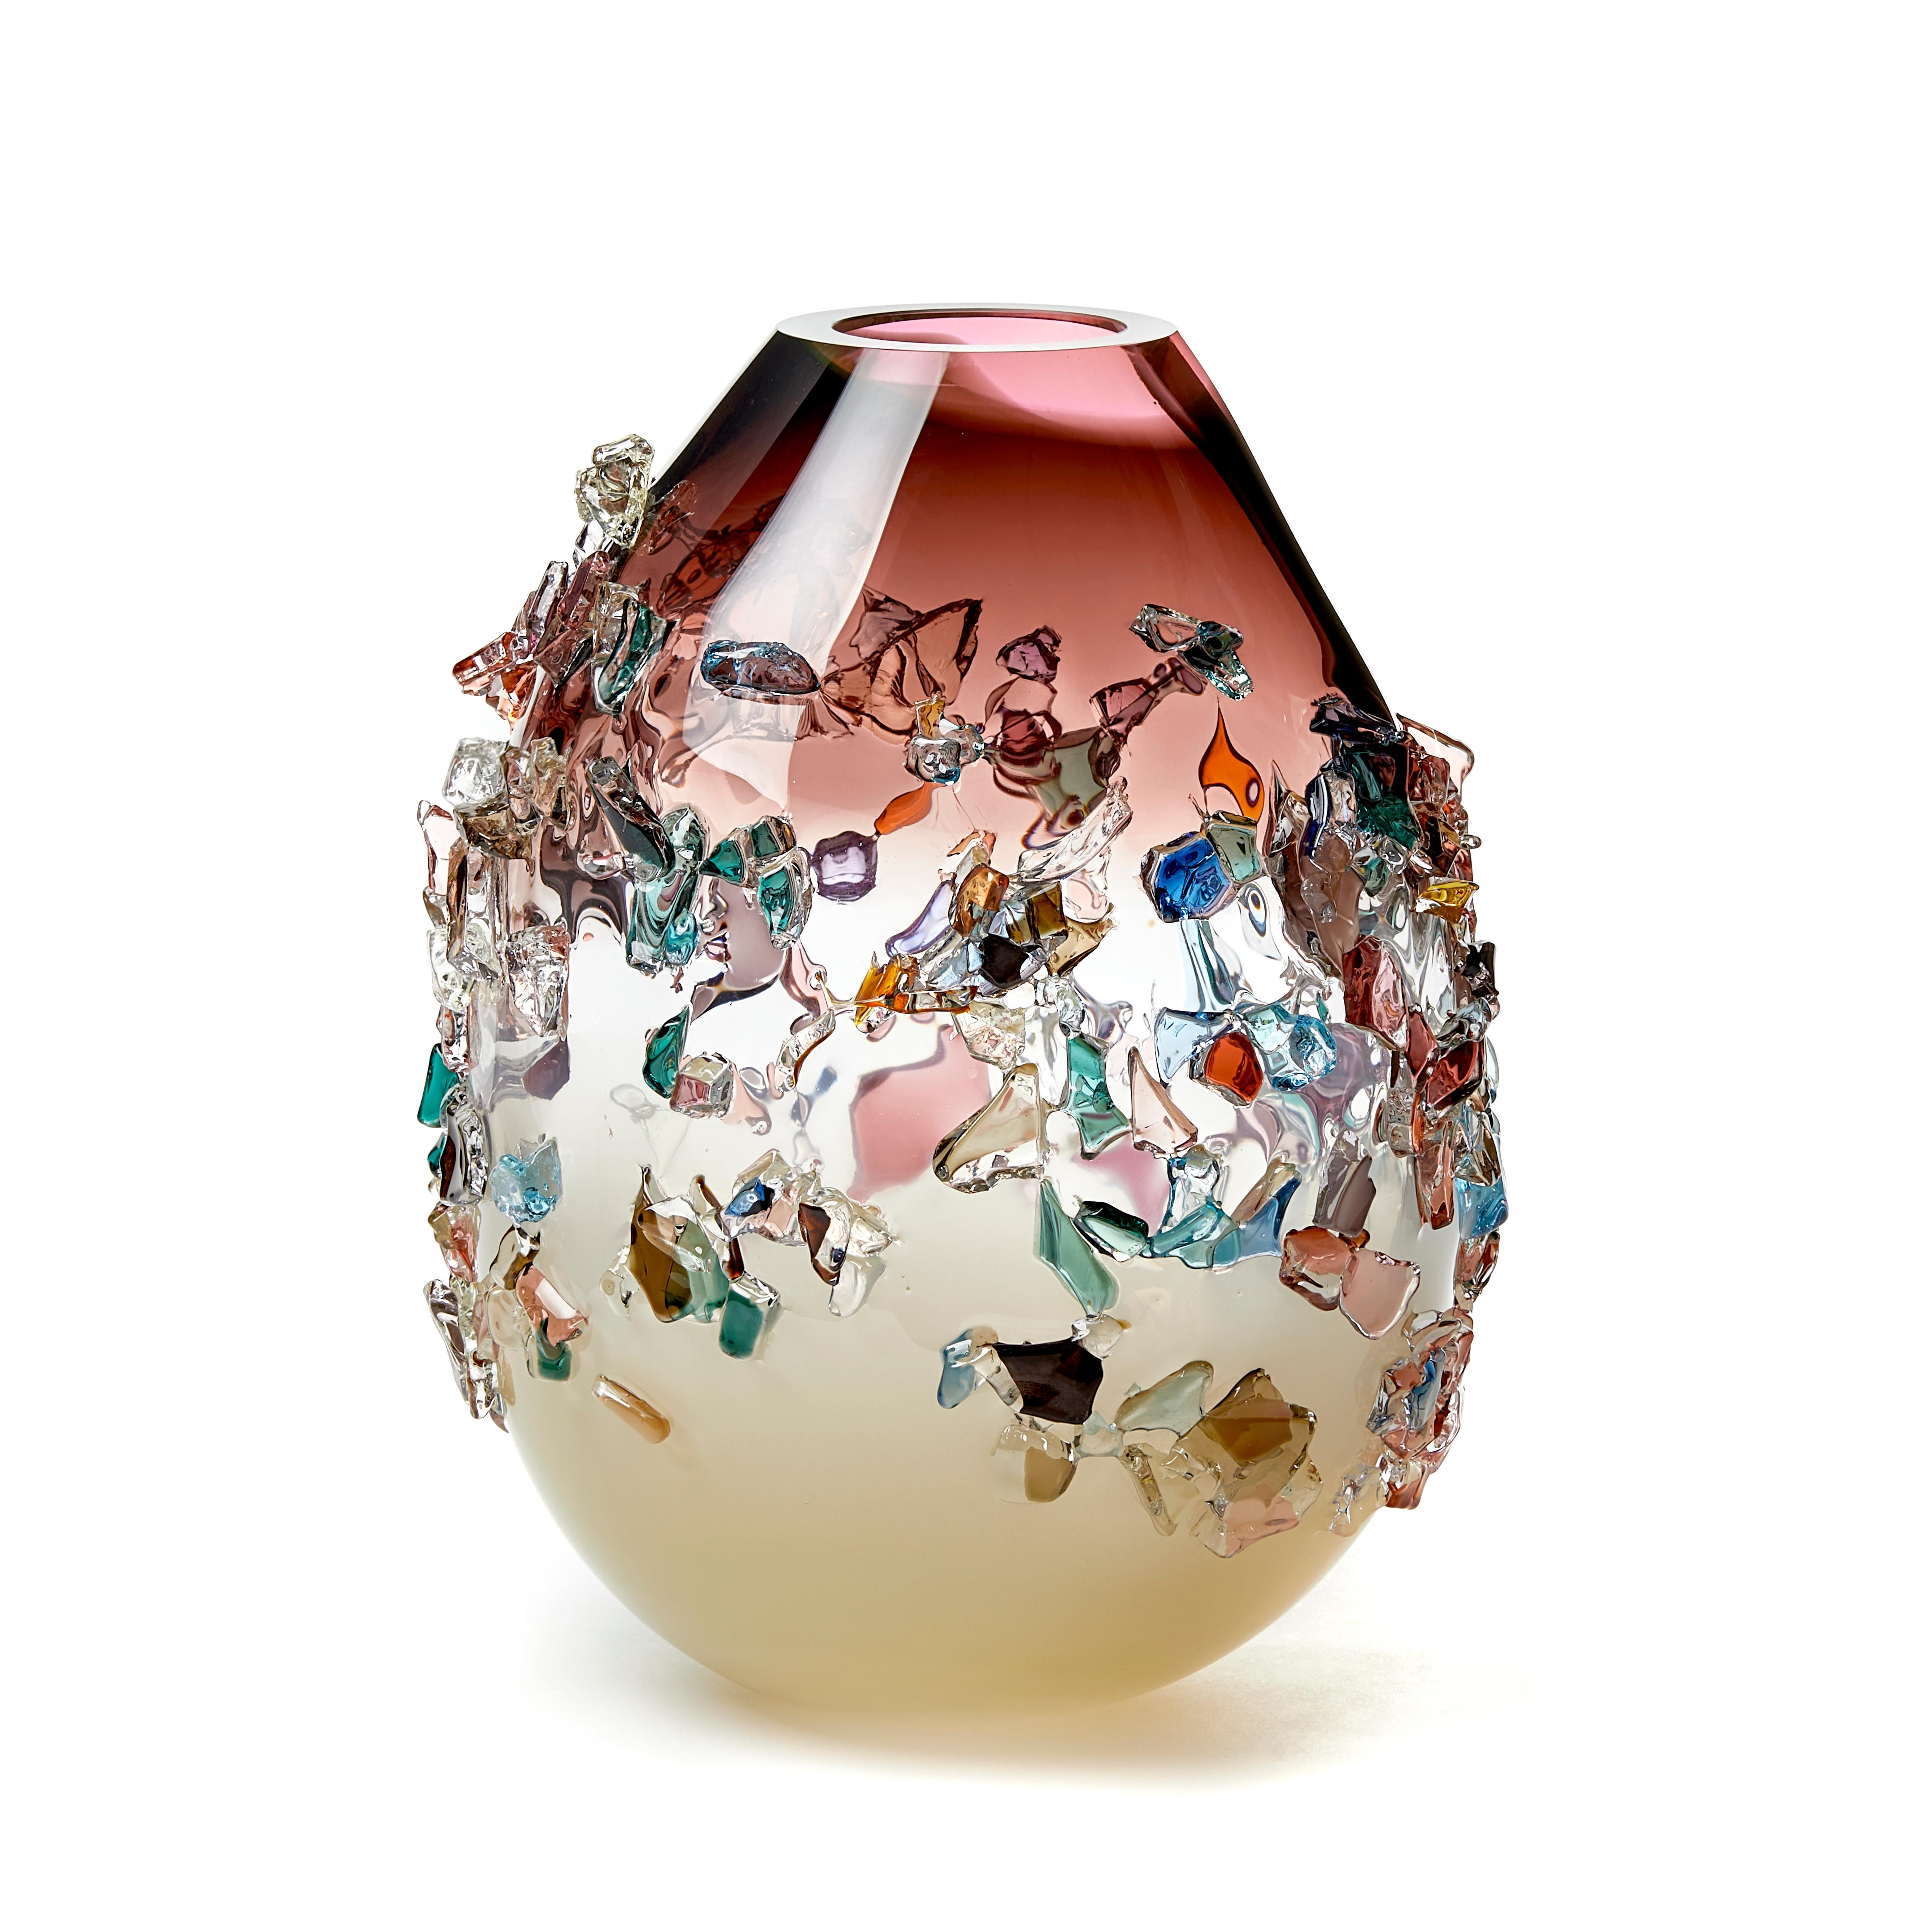 Sakura TRP20003 is a unique dark pink, ivory and multicolored hand blown art glass sculptural vase, covered in an organic glass shard adornment by the Dutch artist Maarten Vorlijk. The piece is flame polished to soften the edges of all the